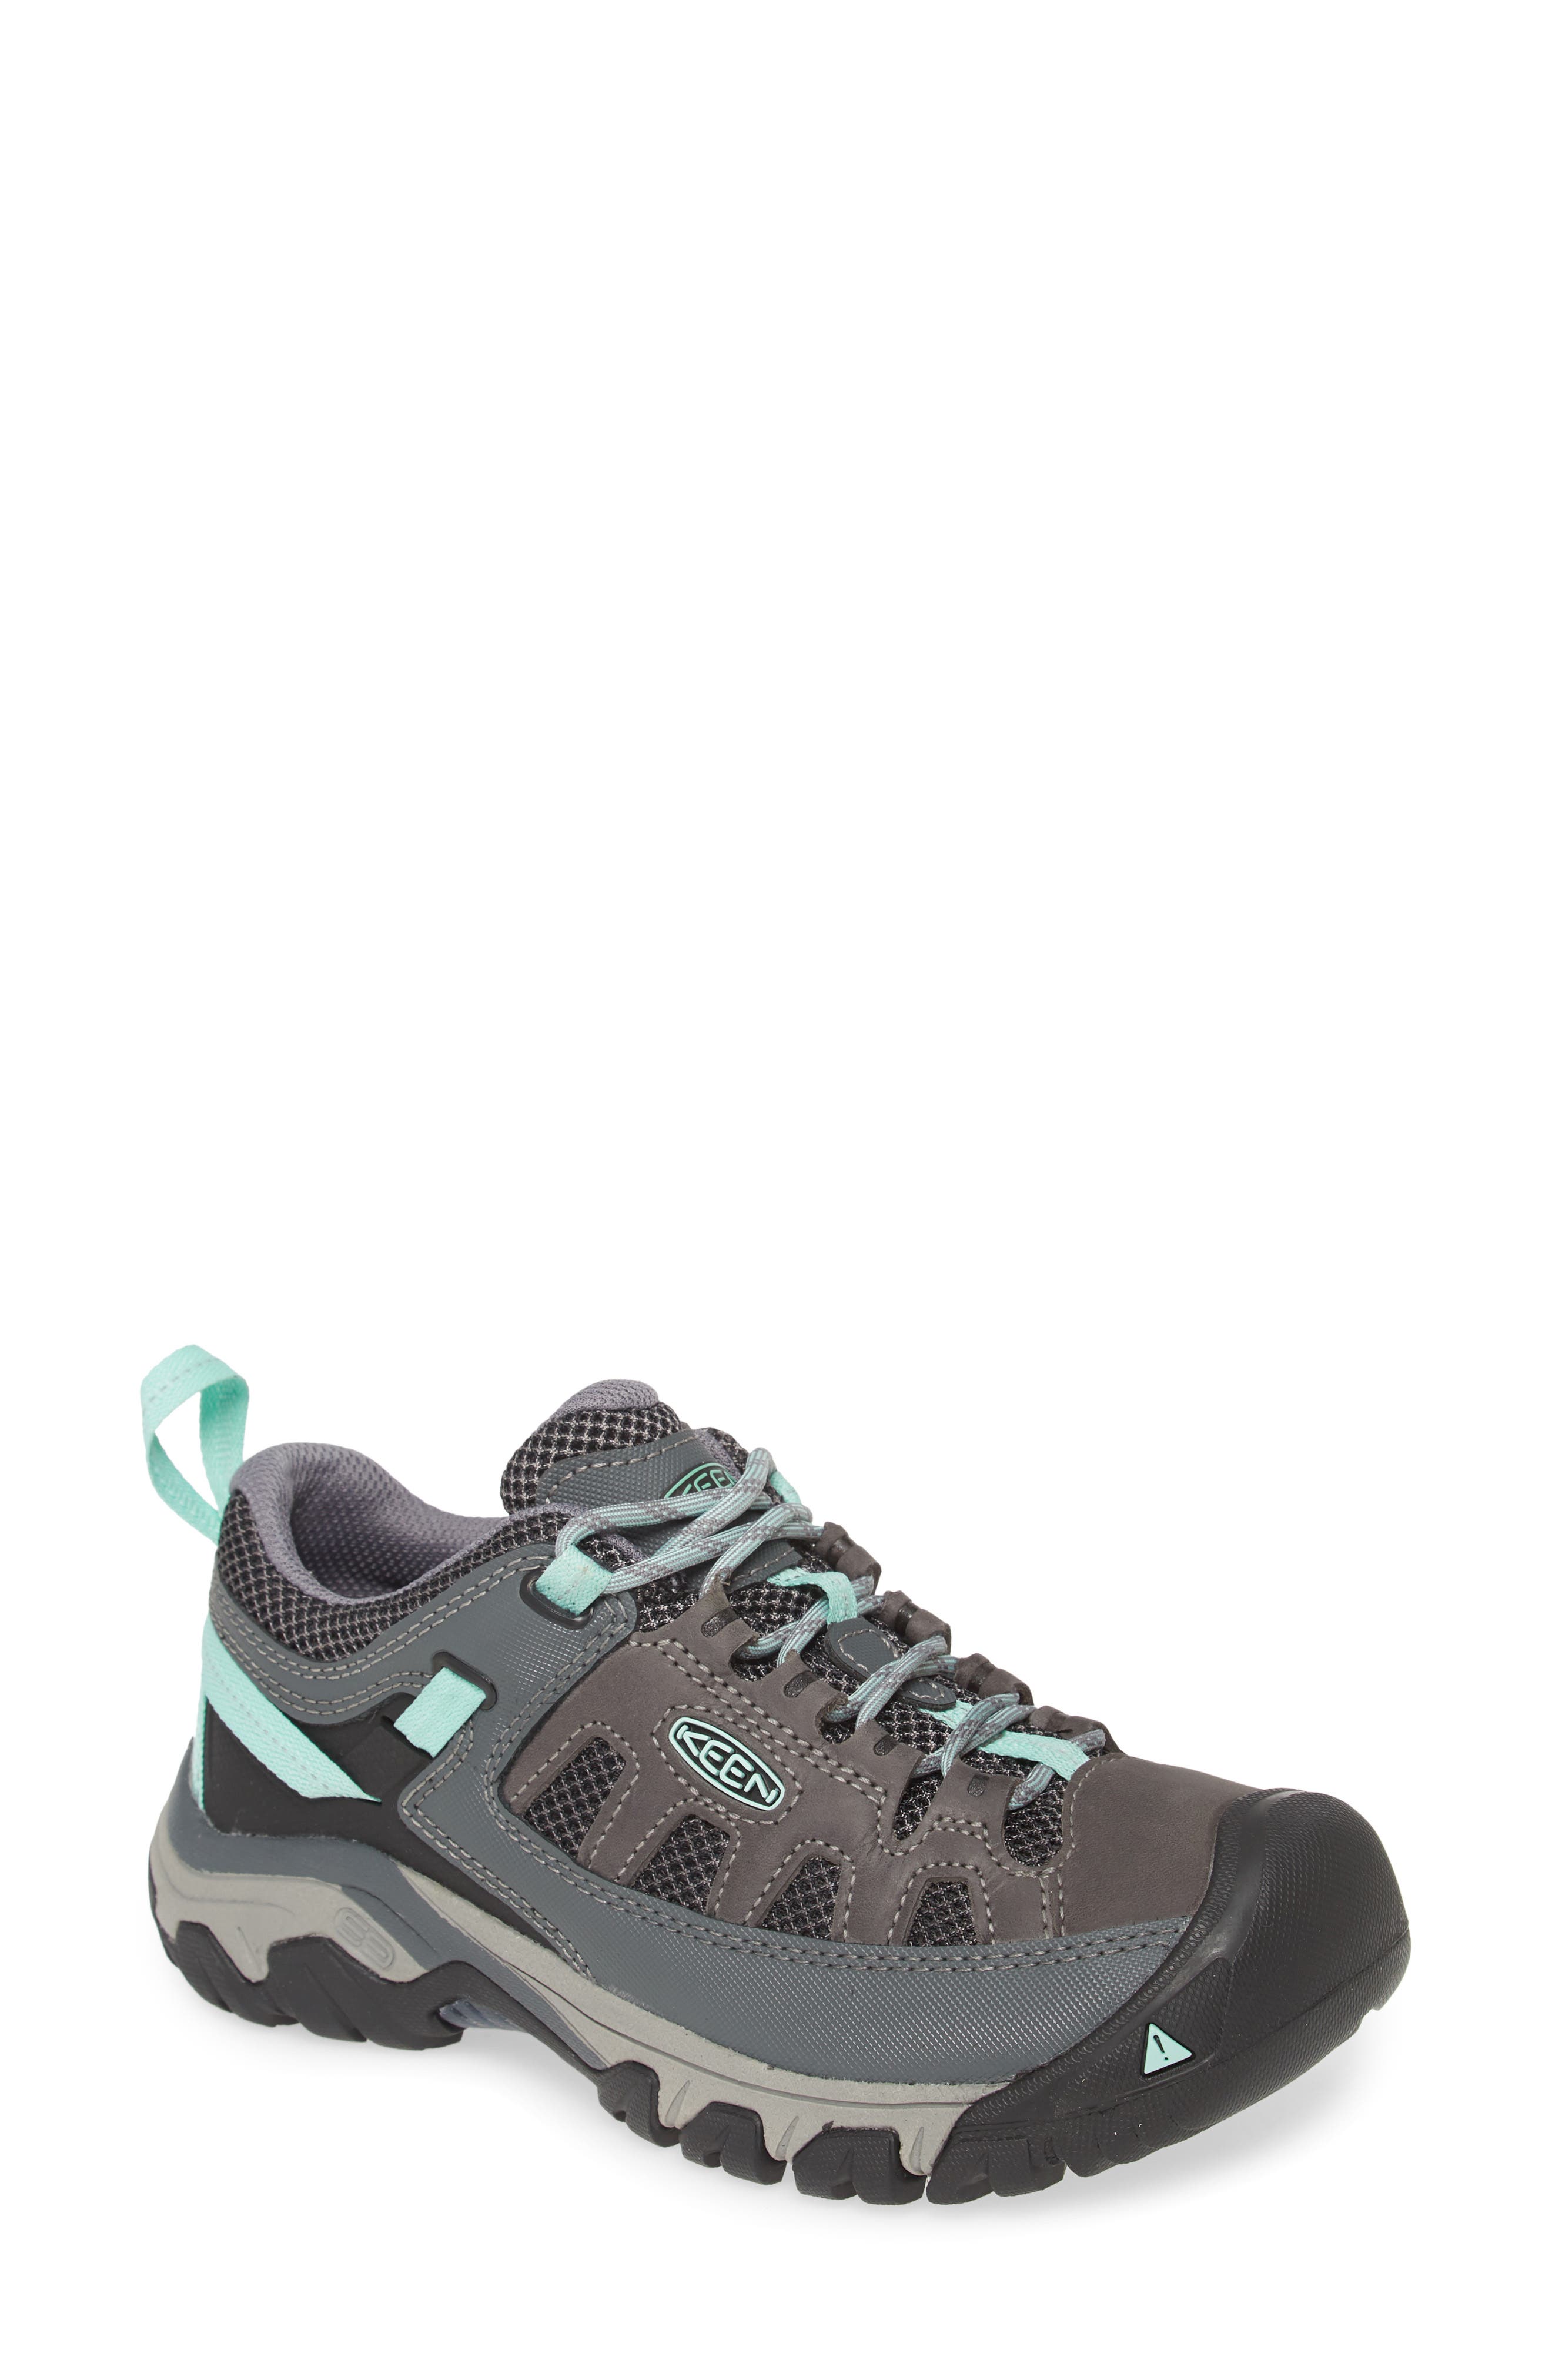 KEEN Womens shoes everyday Leather Water repellent Trekking Walking size 8-10.5 